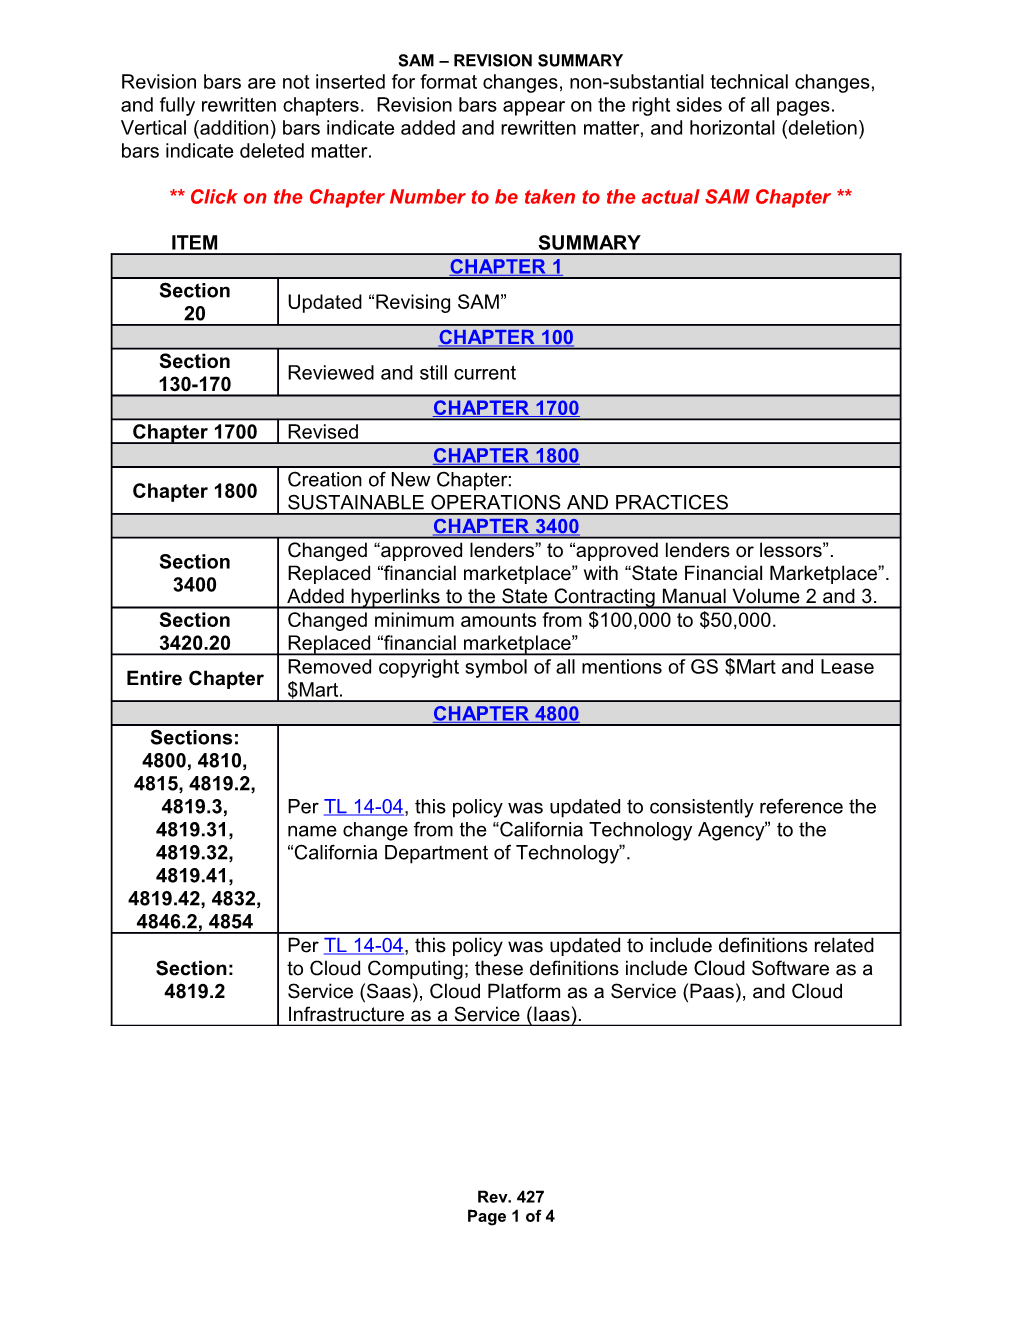 Format and Minor Grammatical Changes Have Been Made to All Pages Included in This Revision